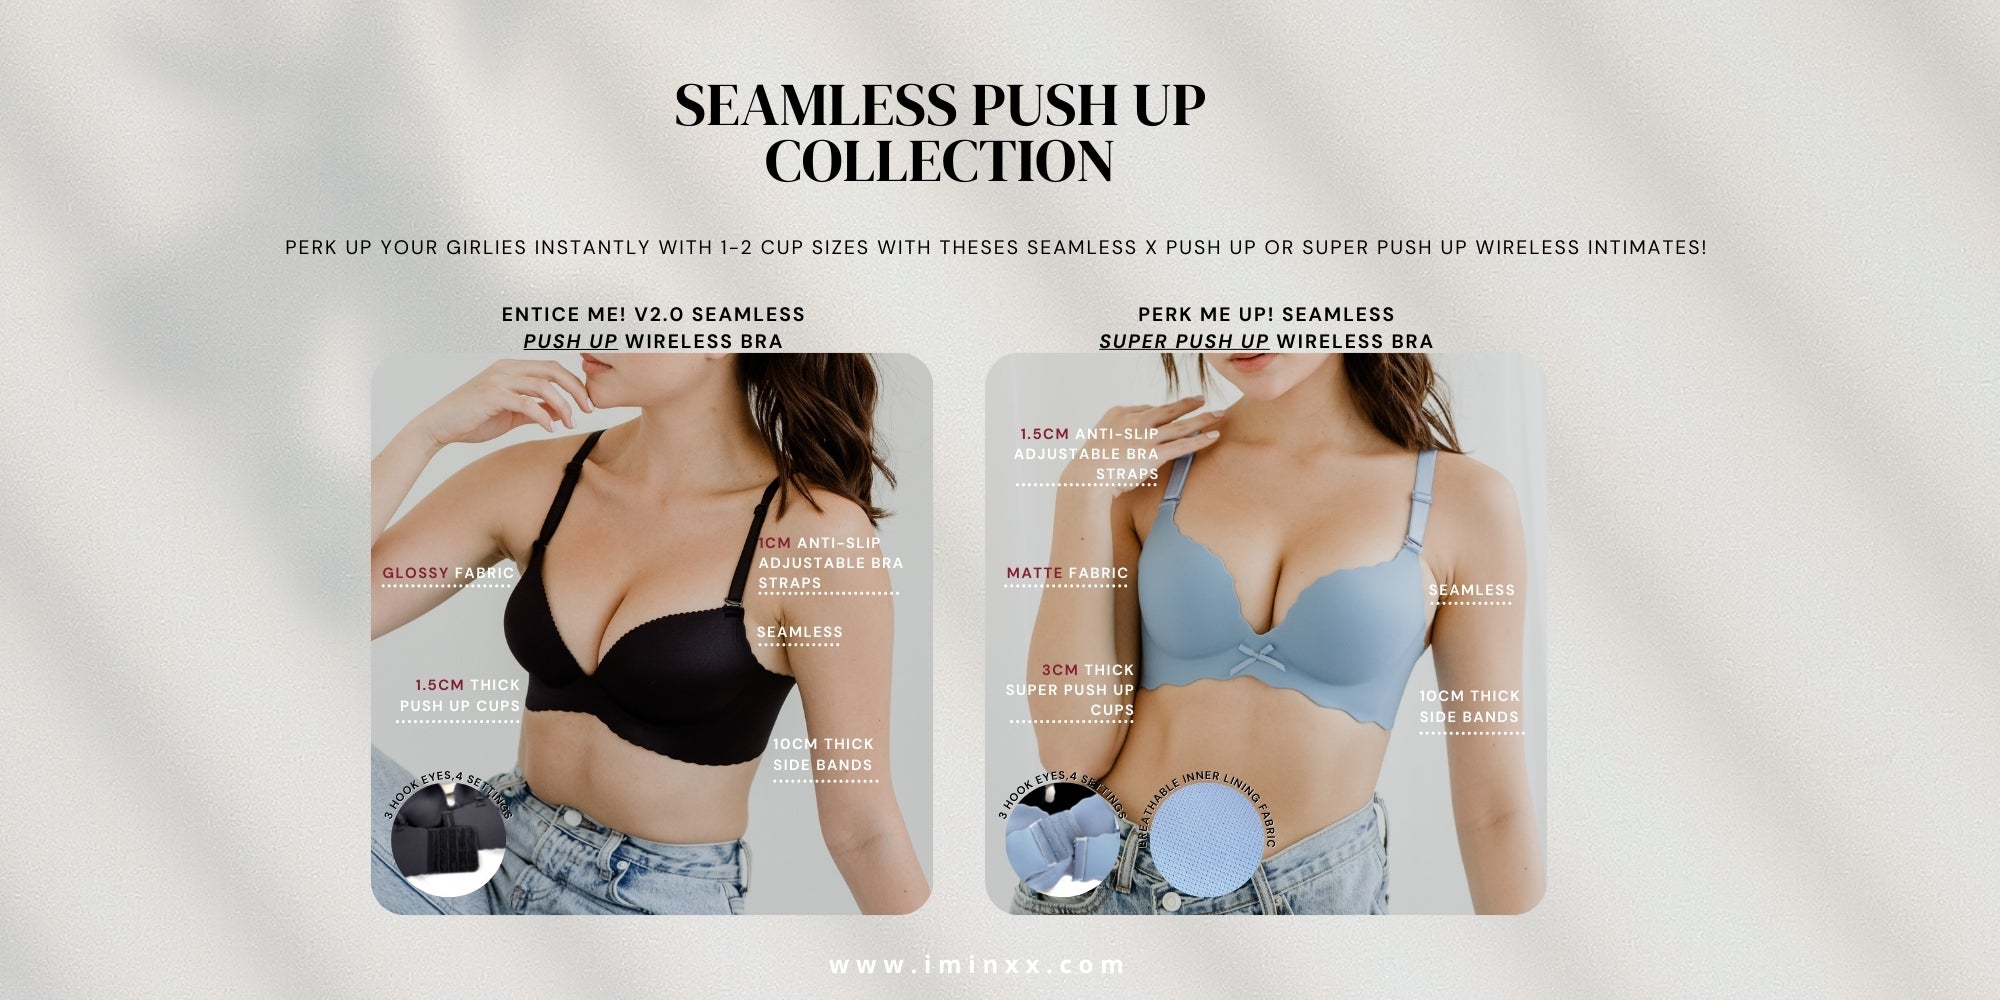 Seamless! Push Up Collection Tagged 32B/70B